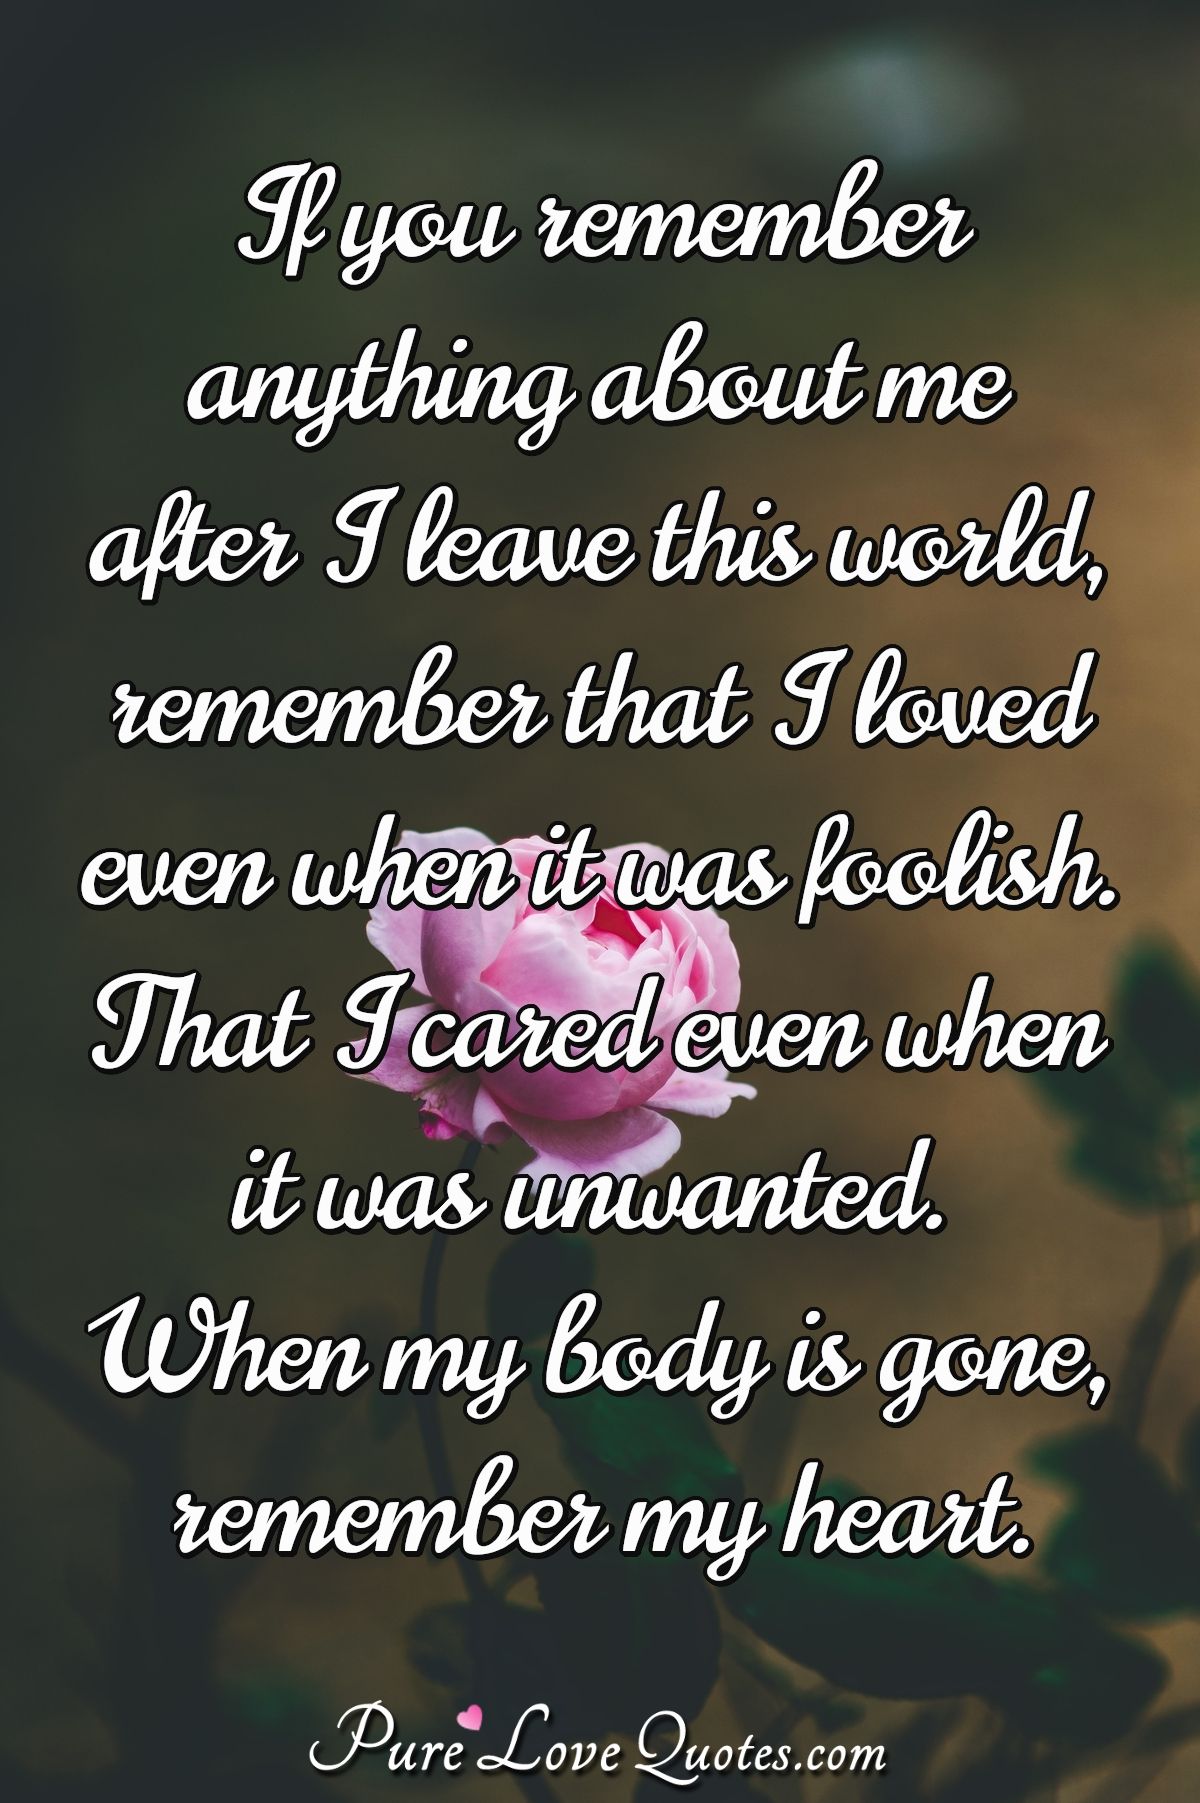 If you remember anything about me after I leave this world, remember that I loved even when it was foolish. That I cared even when it was unwanted. When my body is gone, remember my heart. - Anonymous